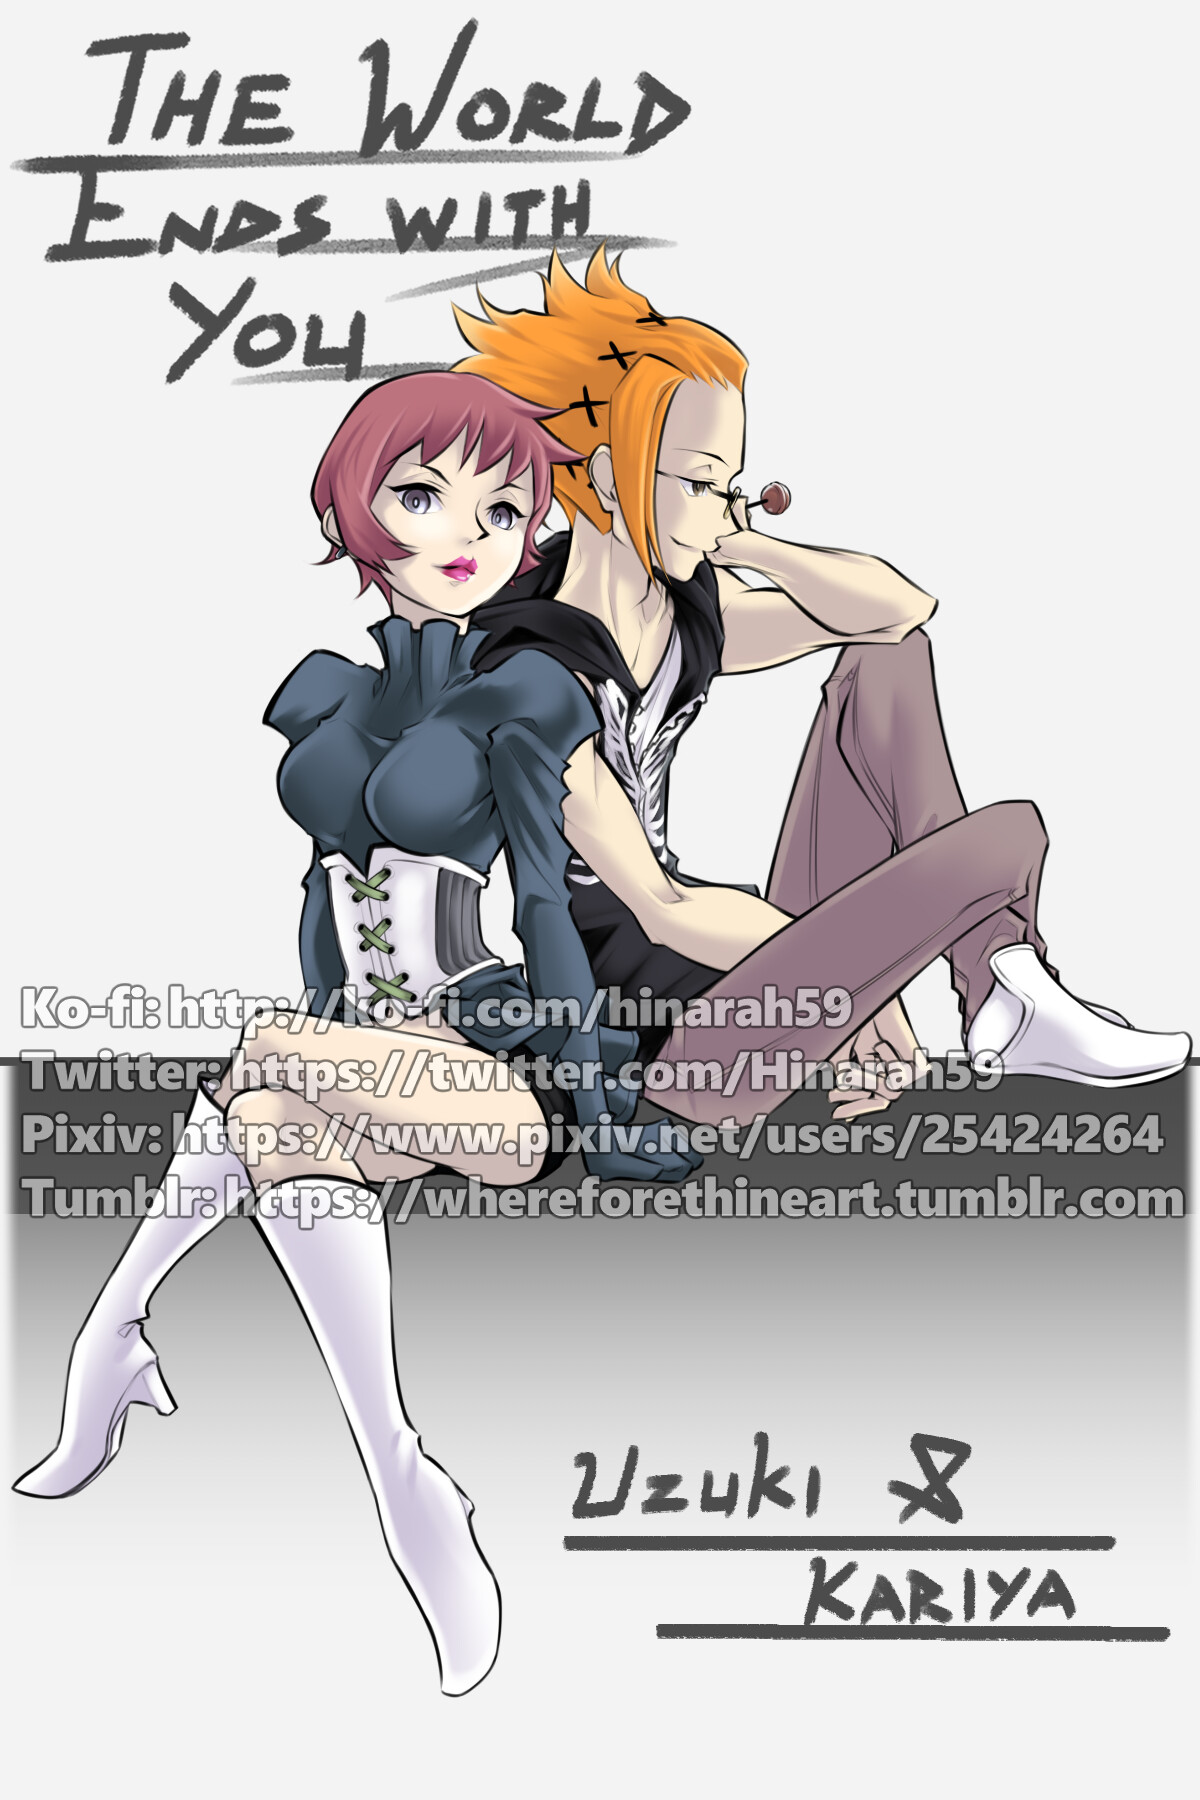 The World Ends With You on Tumblr